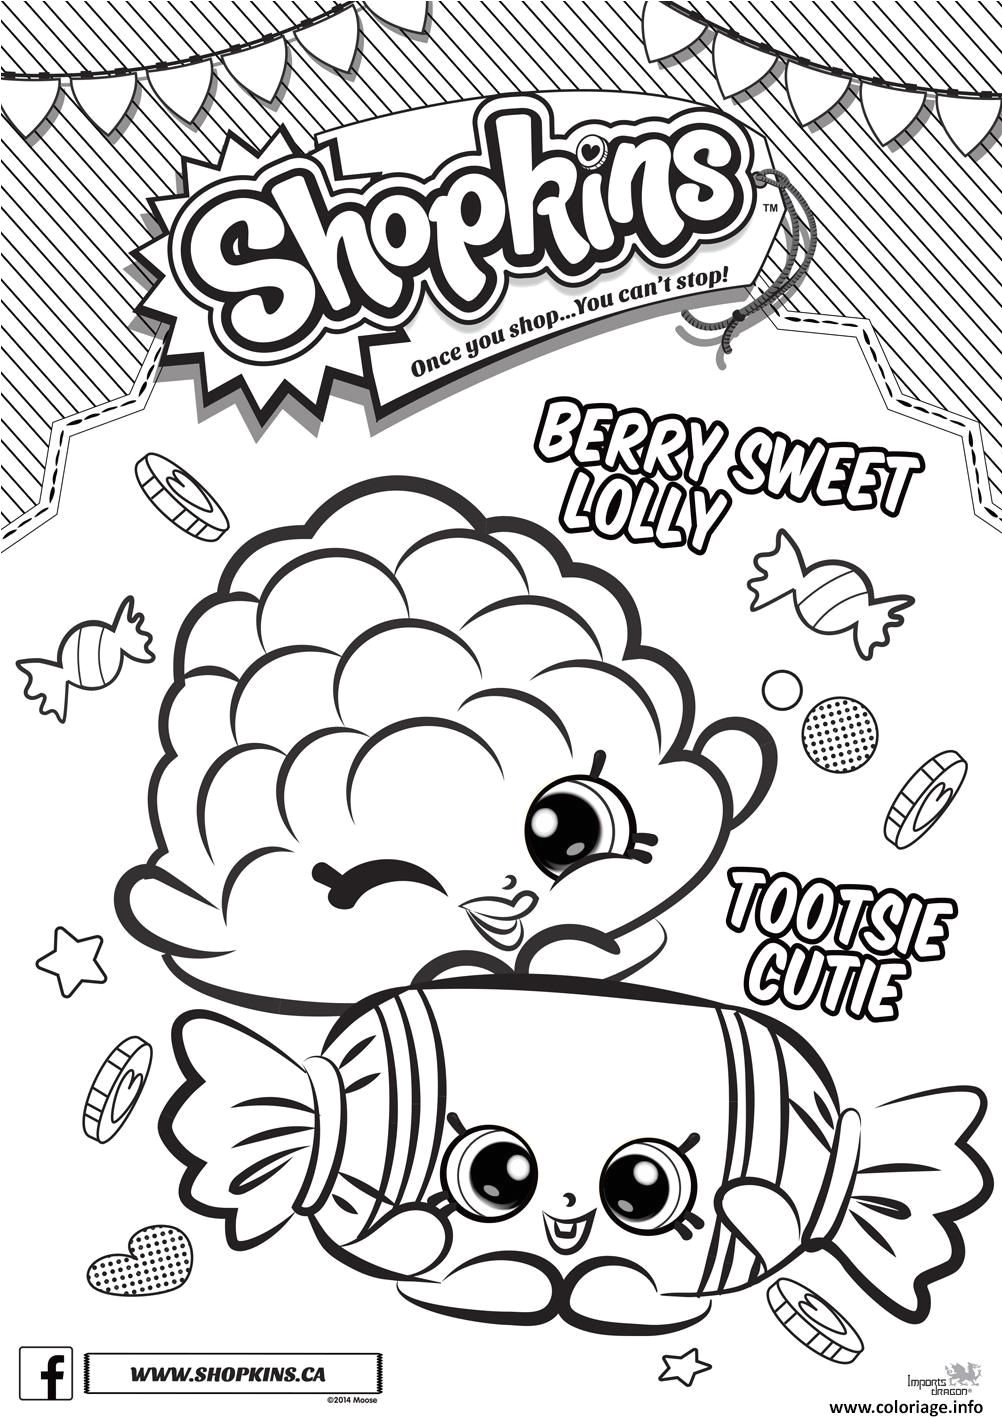 Coloriage shopkins berry sweet ly tootsie cutie Dessin   Imprimer